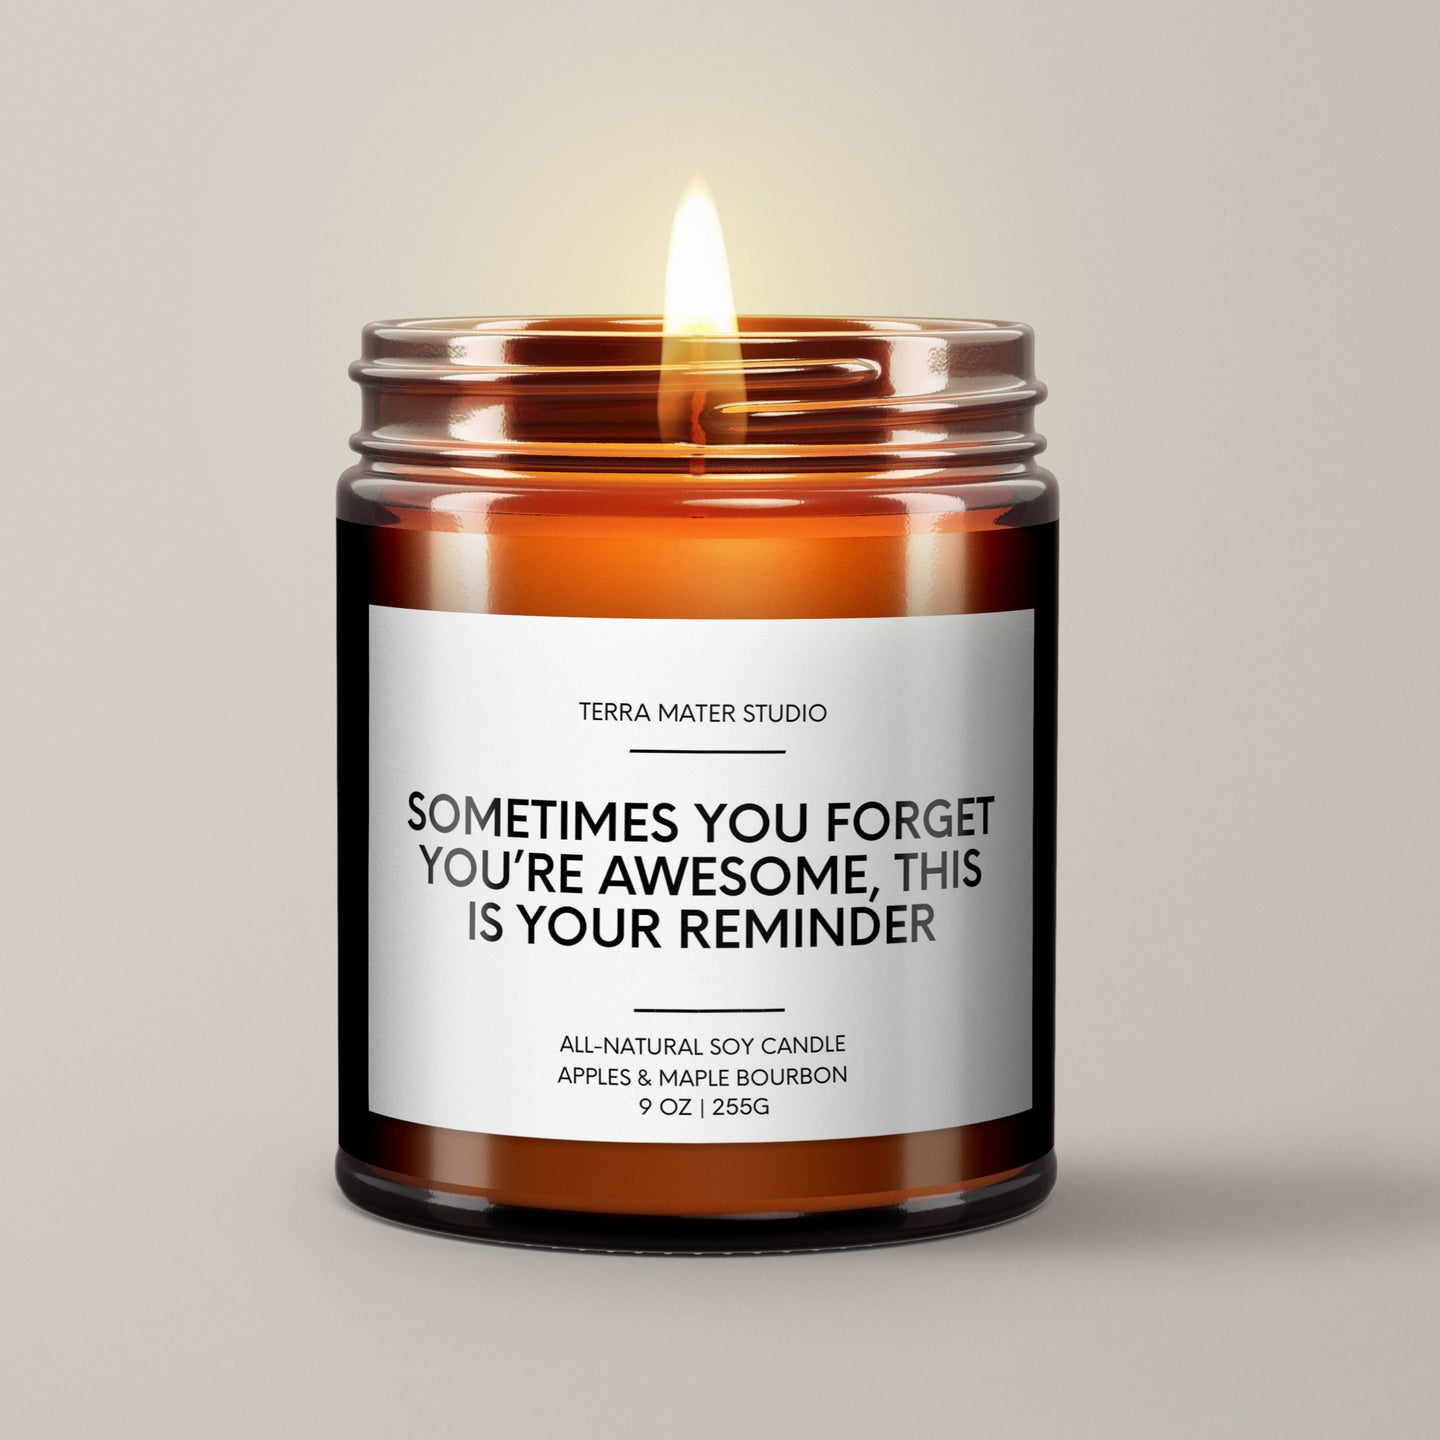 Sometimes You Forget You’re Awesome, This Is Your Reminder | Soy Wax Candle